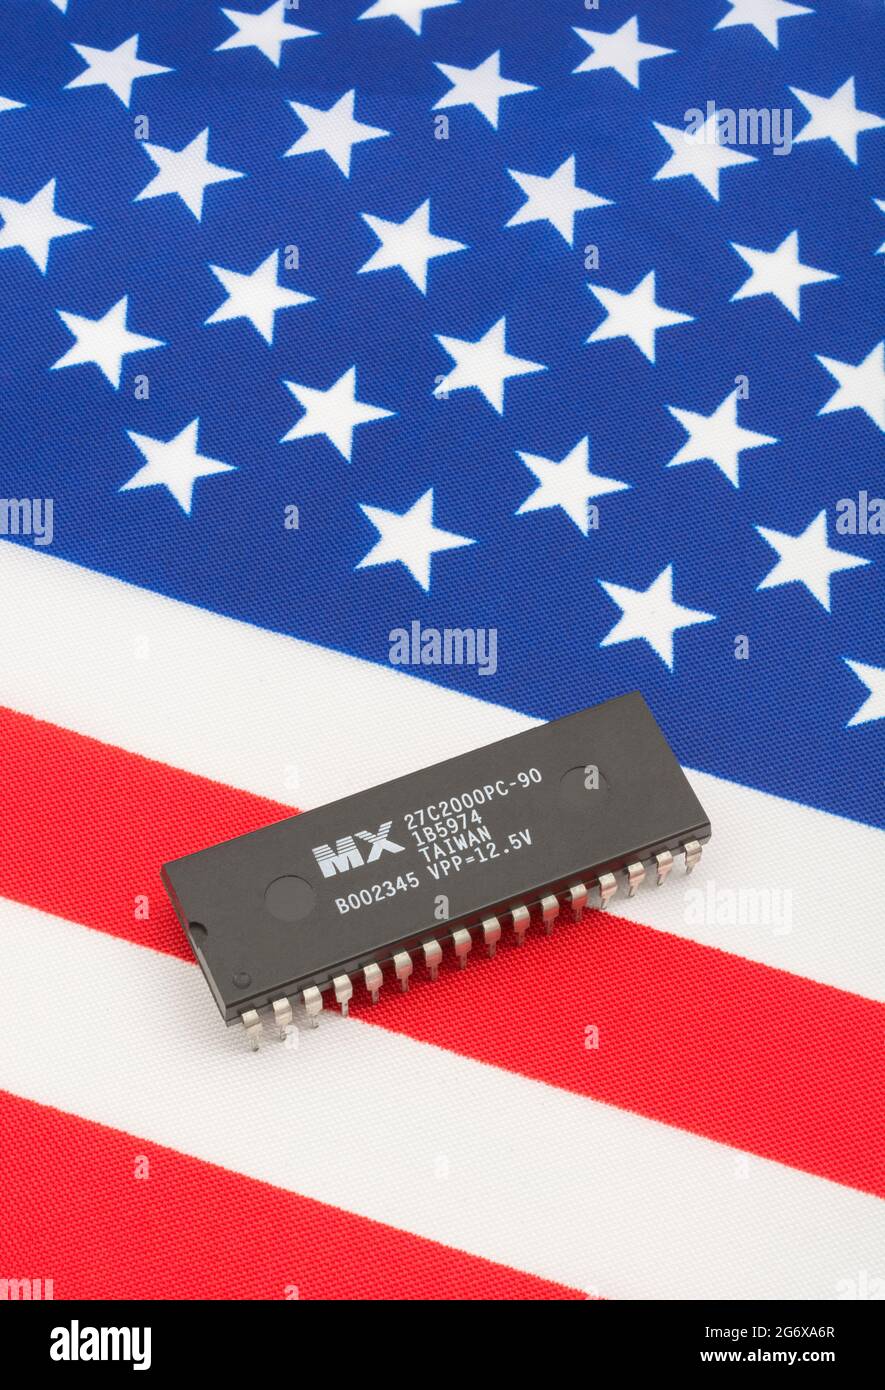 Close shot of Macronix International integrated circuit / EPROM chip on small US Stars & Stripes flag. For US semiconductor shortages in 2021. Stock Photo